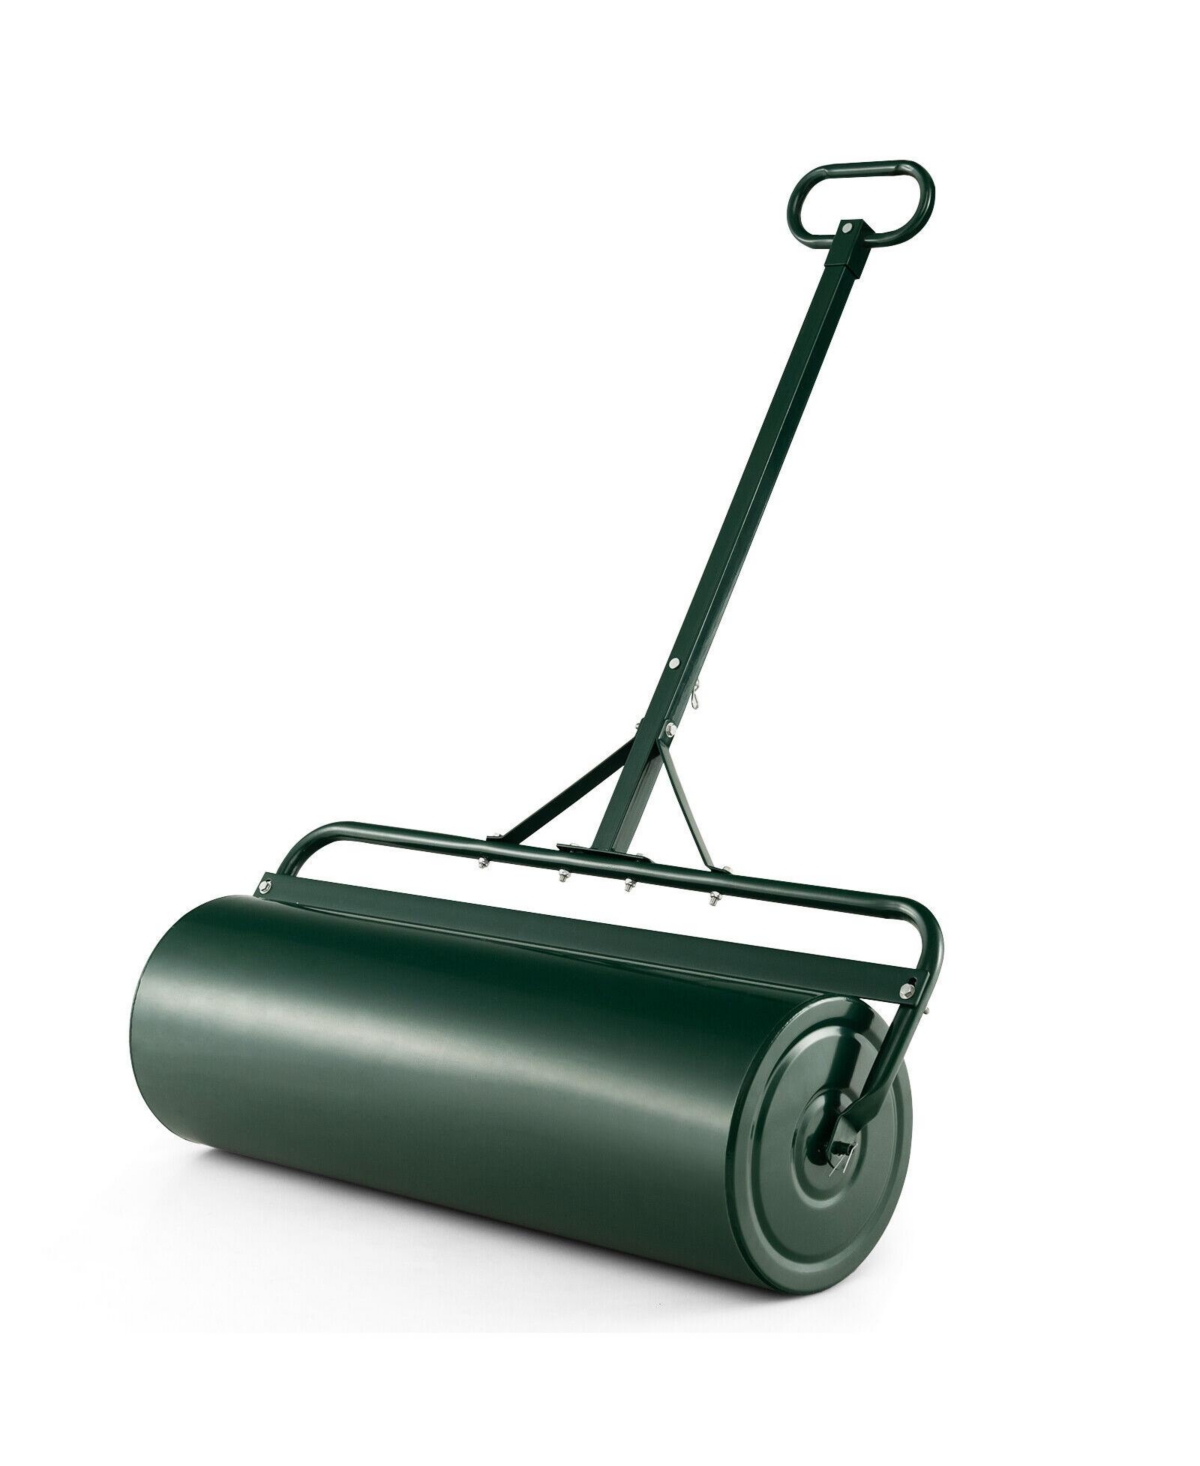 Metal Lawn Roller with Detachable Gripping Handle - Green